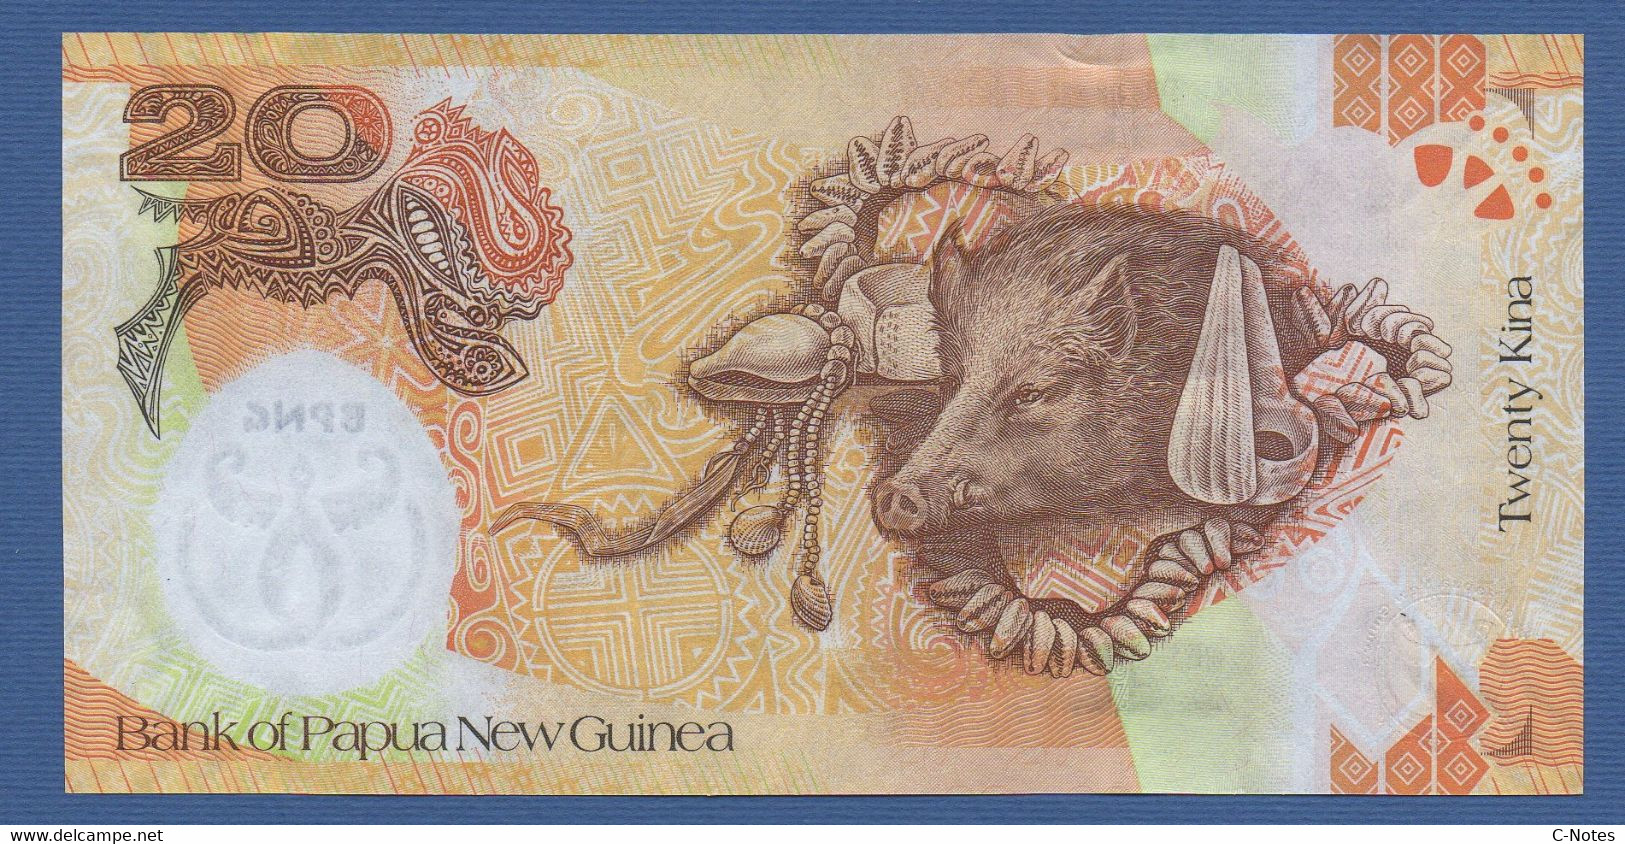 PAPUA NEW GUINEA - P.36 – 100 KINA ND 2008, "35th Anniversary Bank" Commemorative Issue, UNC, Serie BPNG5640410 - Papua New Guinea